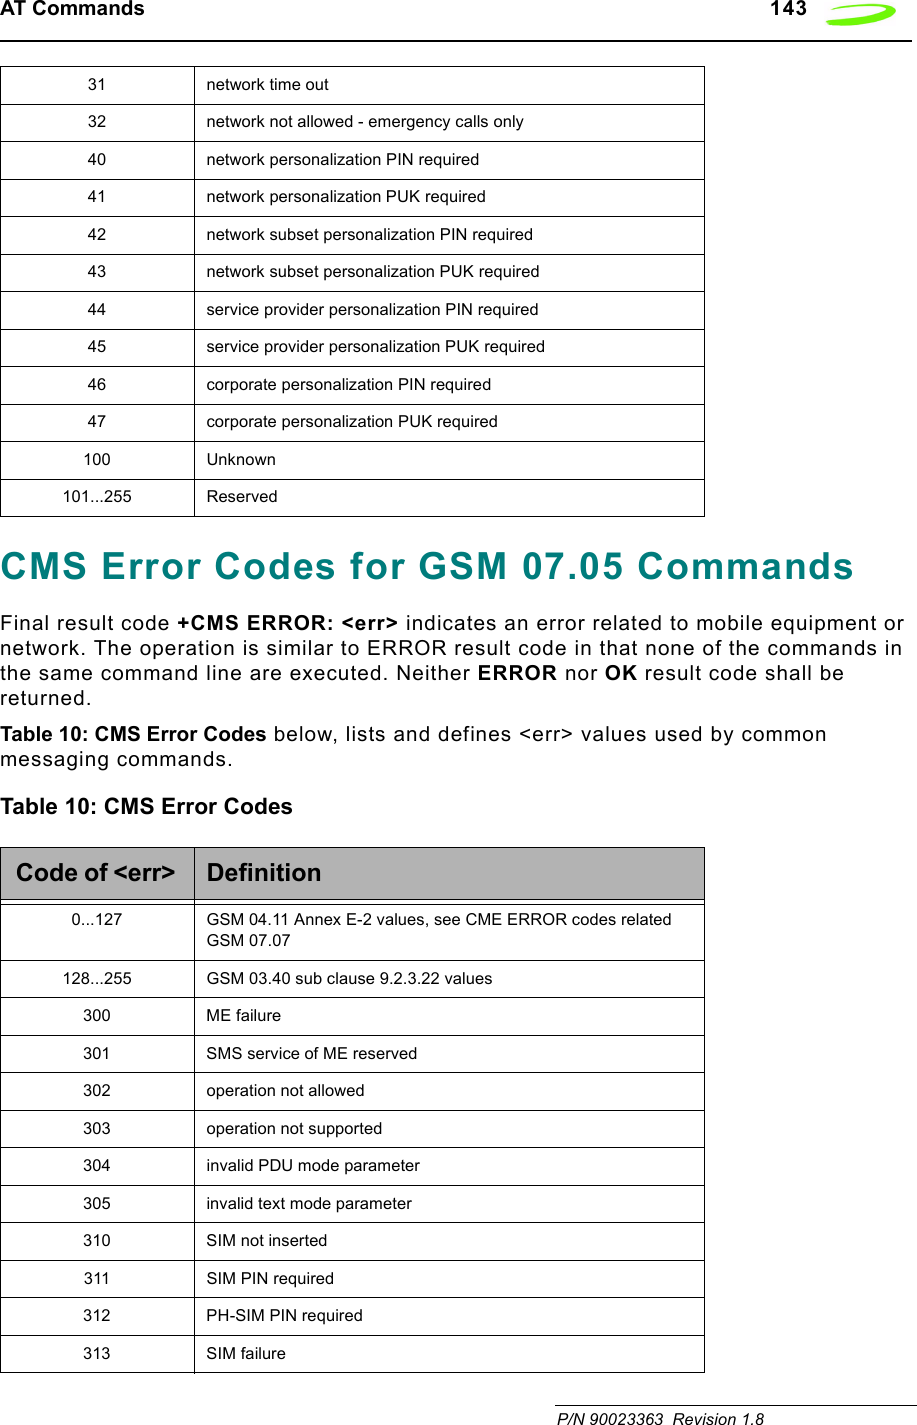 AT Commands   143 P/N 90023363  Revision 1.8 CMS Error Codes for GSM 07.05 CommandsFinal result code +CMS ERROR: &lt;err&gt; indicates an error related to mobile equipment or network. The operation is similar to ERROR result code in that none of the commands in the same command line are executed. Neither ERROR nor OK result code shall be returned. Table 10: CMS Error Codes below, lists and defines &lt;err&gt; values used by common messaging commands.Table 10: CMS Error Codes31 network time out32 network not allowed - emergency calls only40 network personalization PIN required41 network personalization PUK required42 network subset personalization PIN required43 network subset personalization PUK required44 service provider personalization PIN required45 service provider personalization PUK required46 corporate personalization PIN required47 corporate personalization PUK required100 Unknown101...255 ReservedCode of &lt;err&gt;  Definition0...127 GSM 04.11 Annex E-2 values, see CME ERROR codes related GSM 07.07128...255 GSM 03.40 sub clause 9.2.3.22 values300 ME failure301 SMS service of ME reserved302 operation not allowed303 operation not supported304 invalid PDU mode parameter305 invalid text mode parameter310 SIM not inserted311 SIM PIN required312 PH-SIM PIN required313 SIM failure